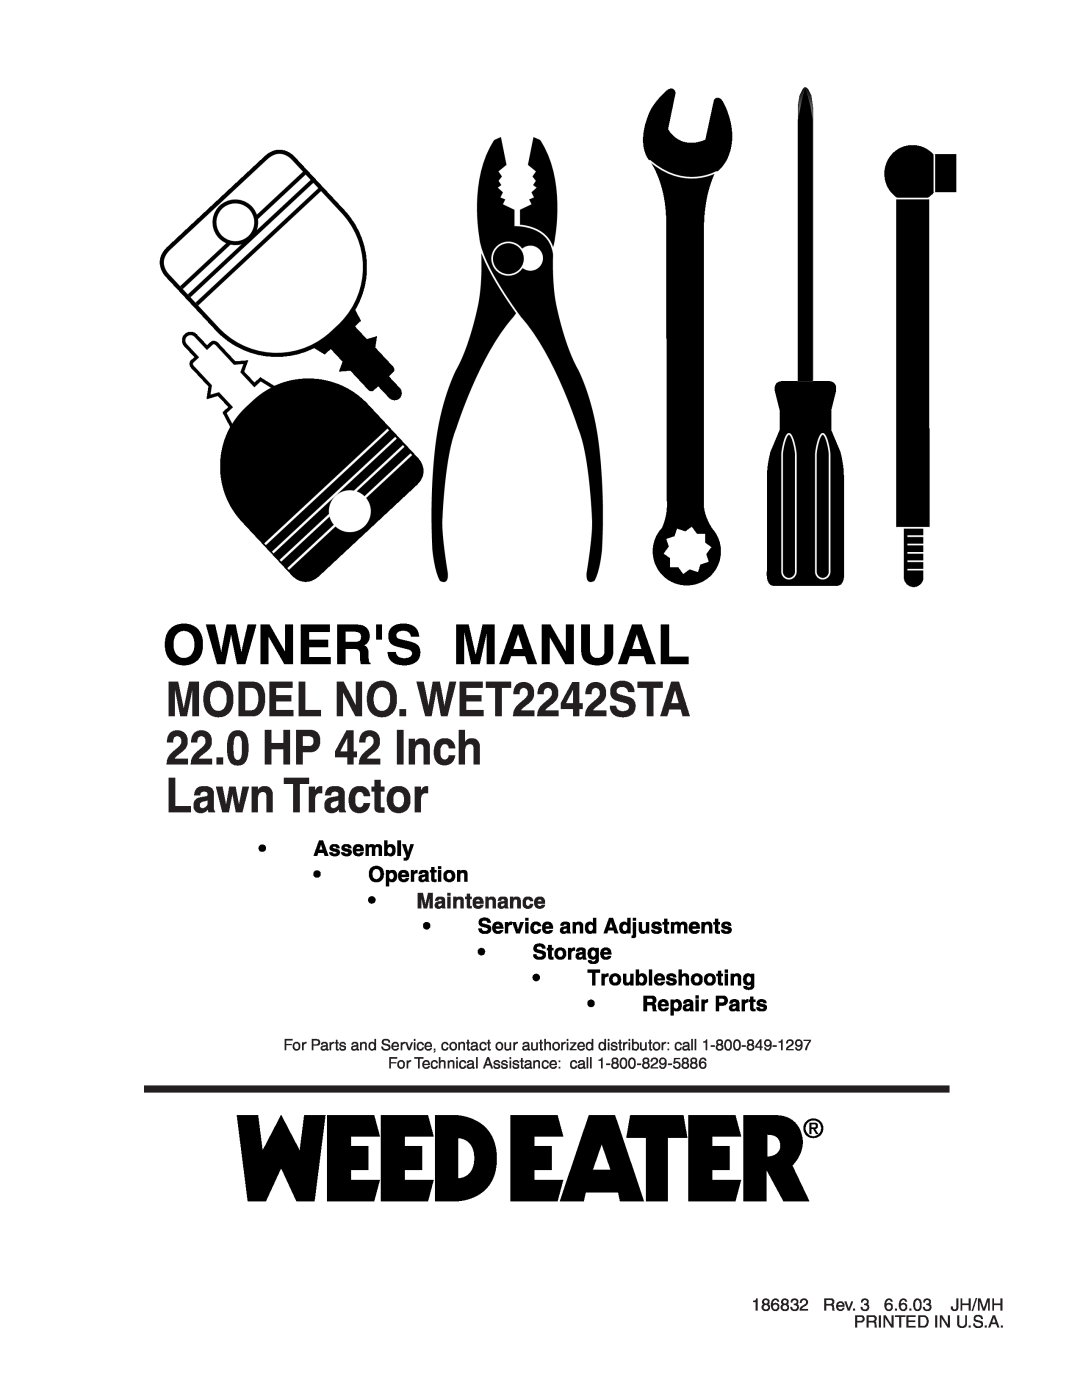 Weed Eater manual MODEL NO. WET2242STA 22.0 HP 42 Inch Lawn Tractor, 186832 Rev. 3 6.6.03 JH/MH PRINTED IN U.S.A 